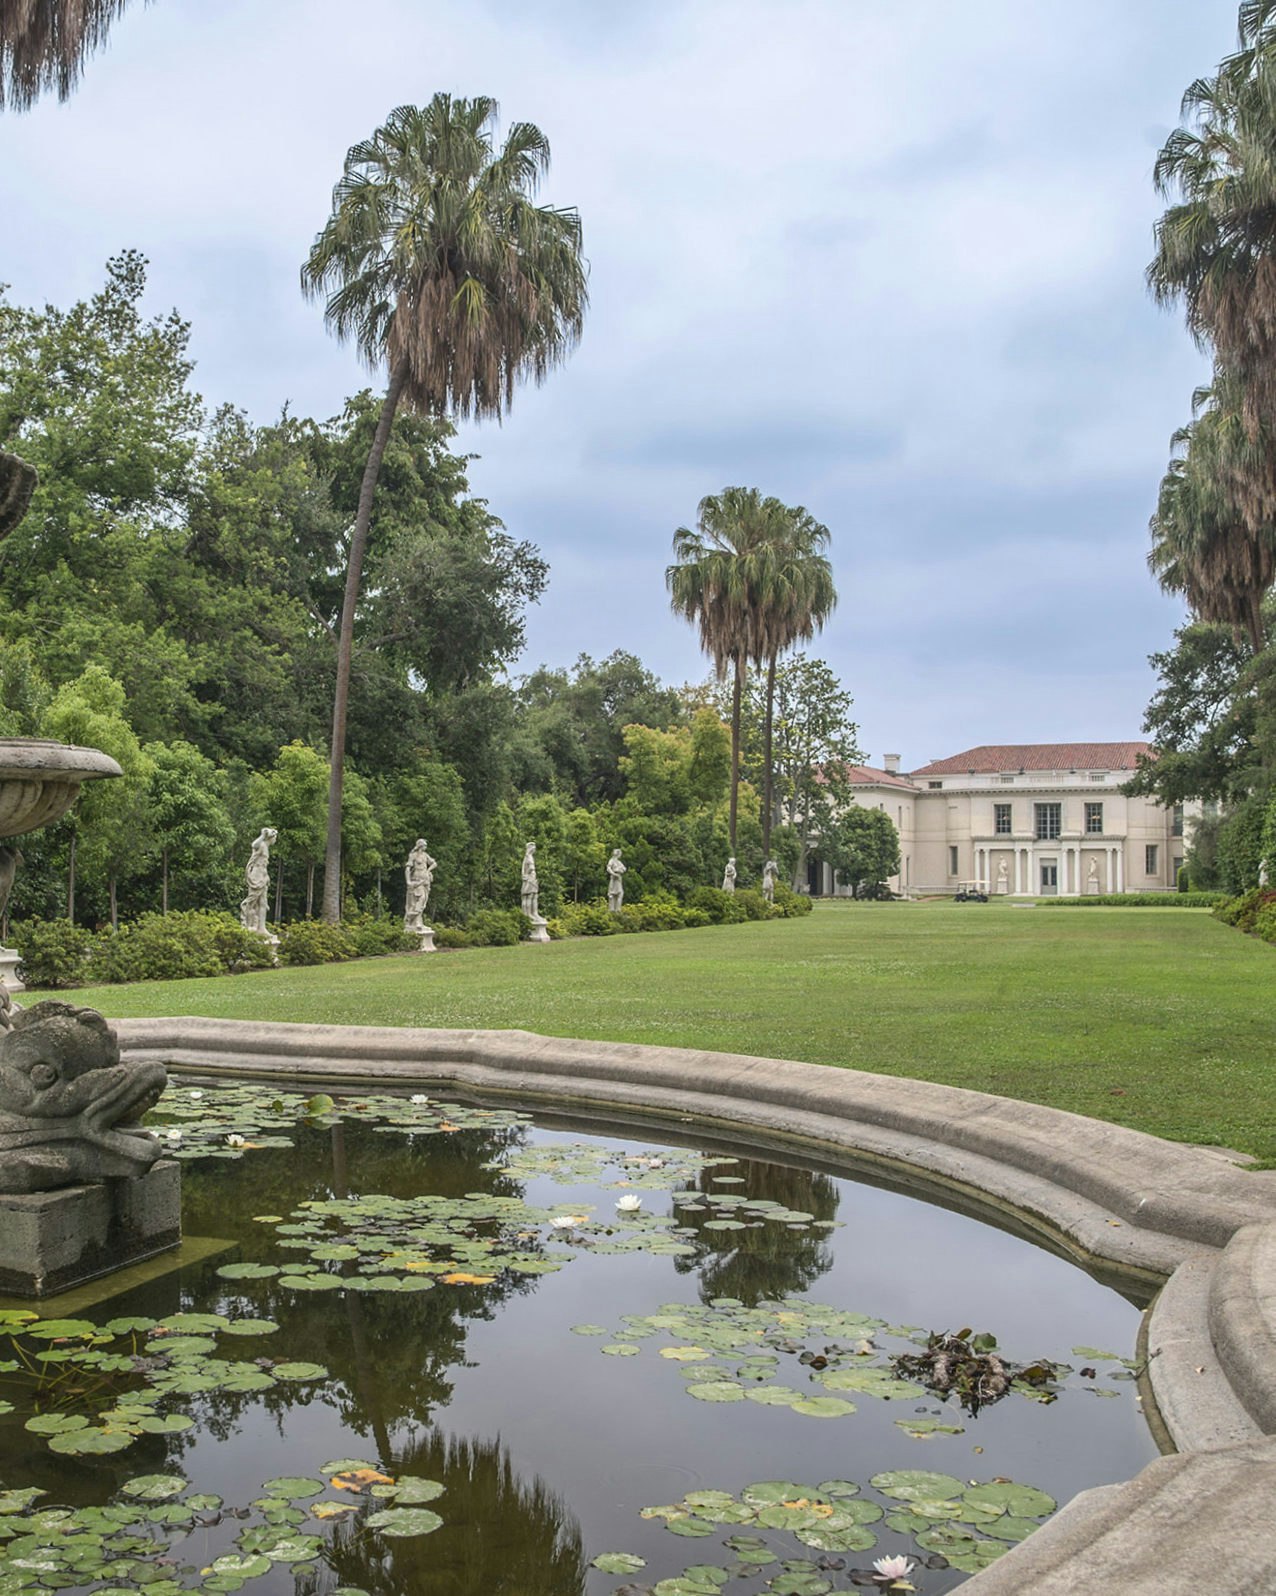 A photograph of a stone fountain with lily pads in the water. A green lawn vista flanked by palm trees and classical stone statues recede to a cream stone building with an orange tiled roof.